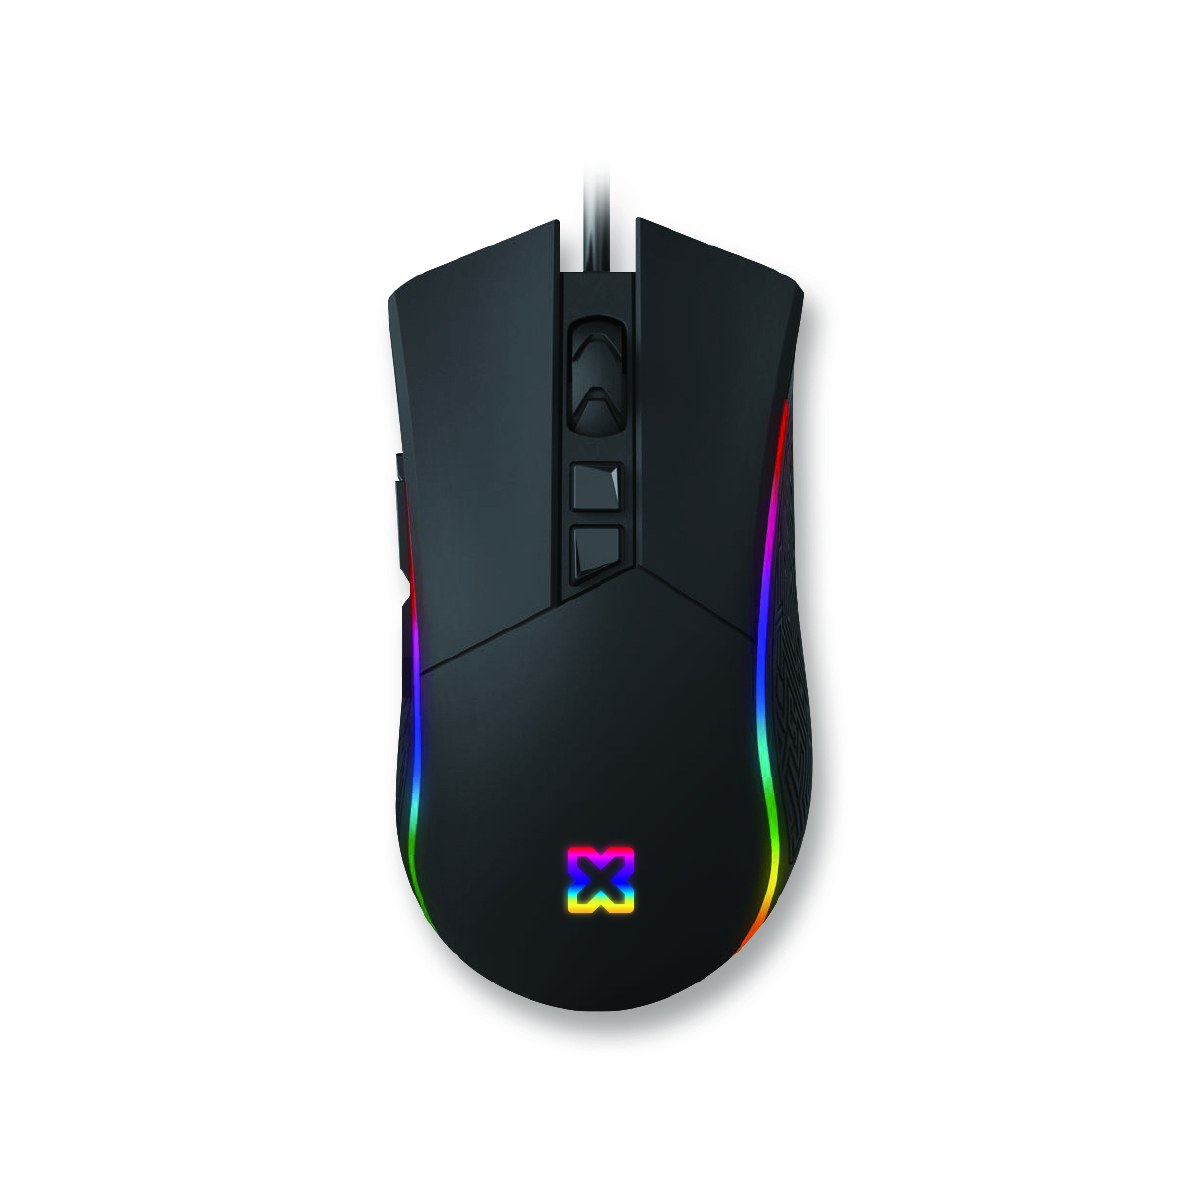 Mouse Gaming XM550